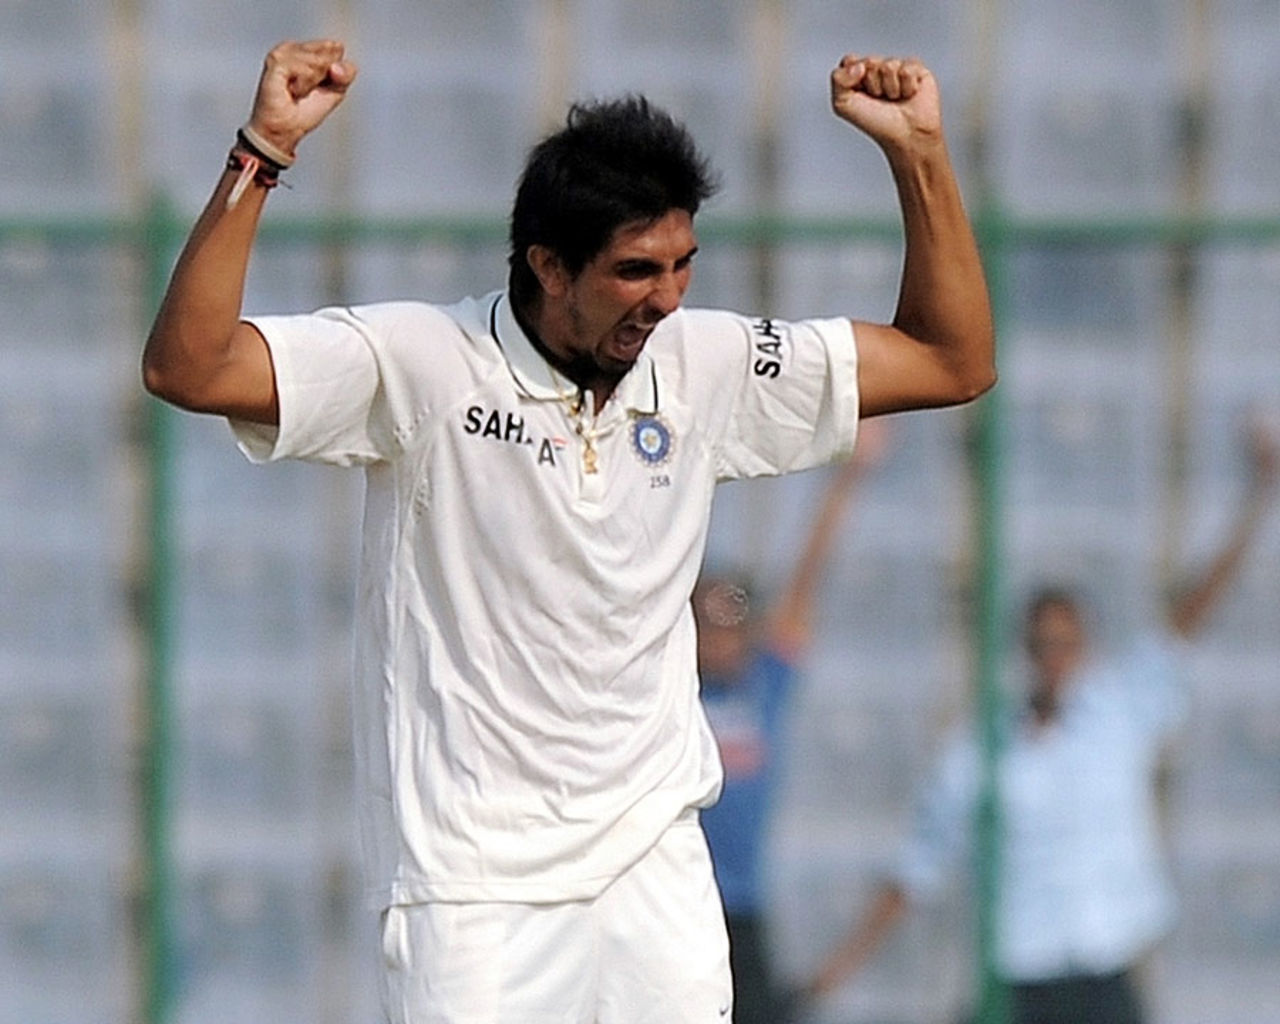 Ishant Sharma is relieved after getting rid of the centurion Shivnarine Chanderpaul, India v West Indies, 1st Test, New Delhi, 2nd day